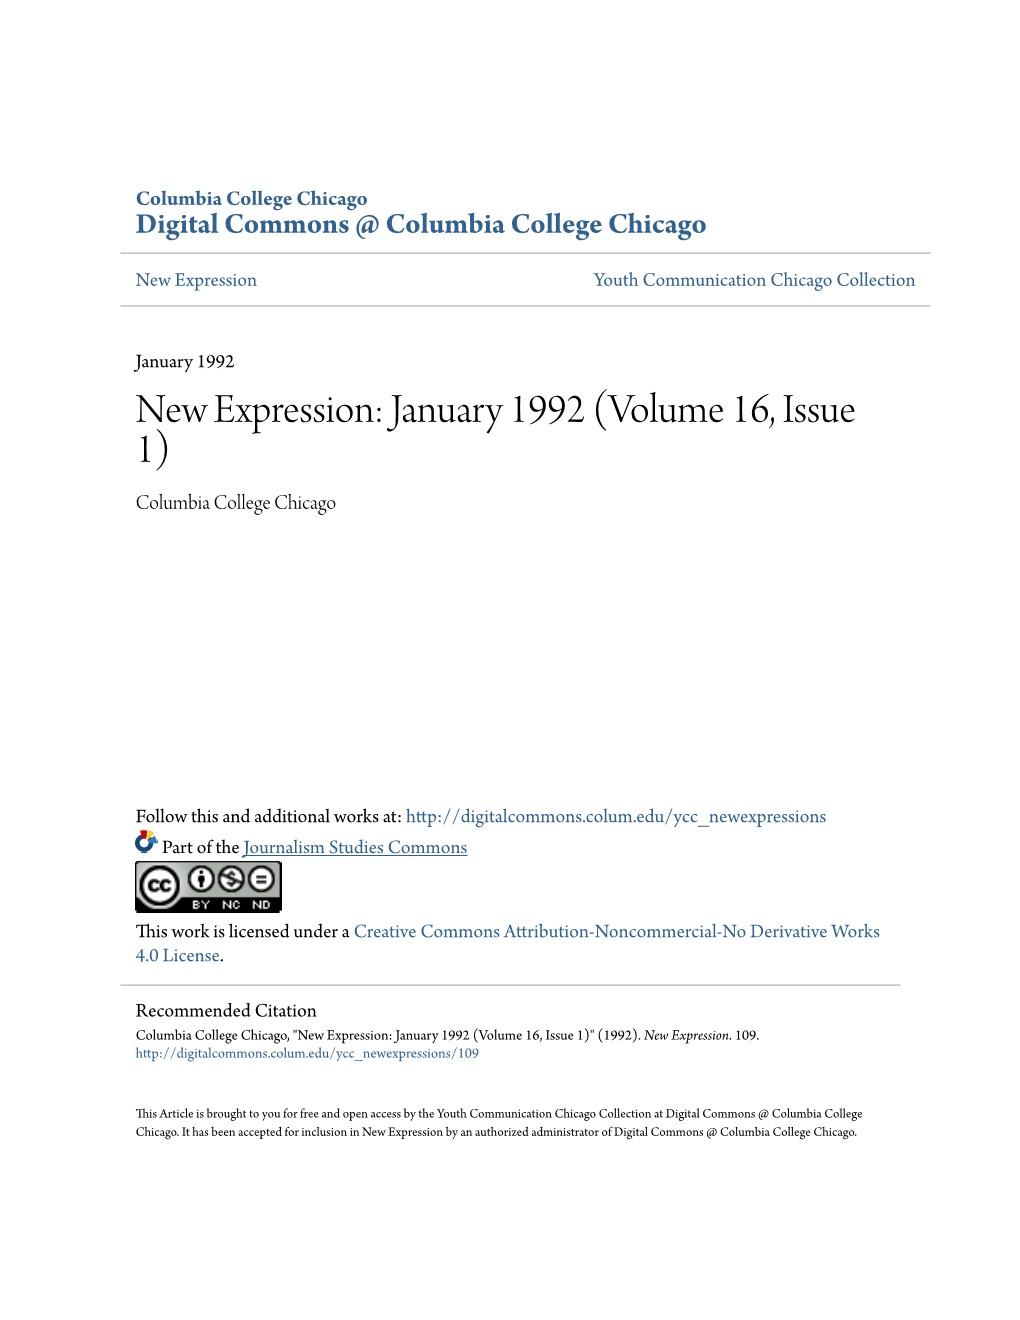 New Expression: January 1992 (Volume 16, Issue 1) Columbia College Chicago